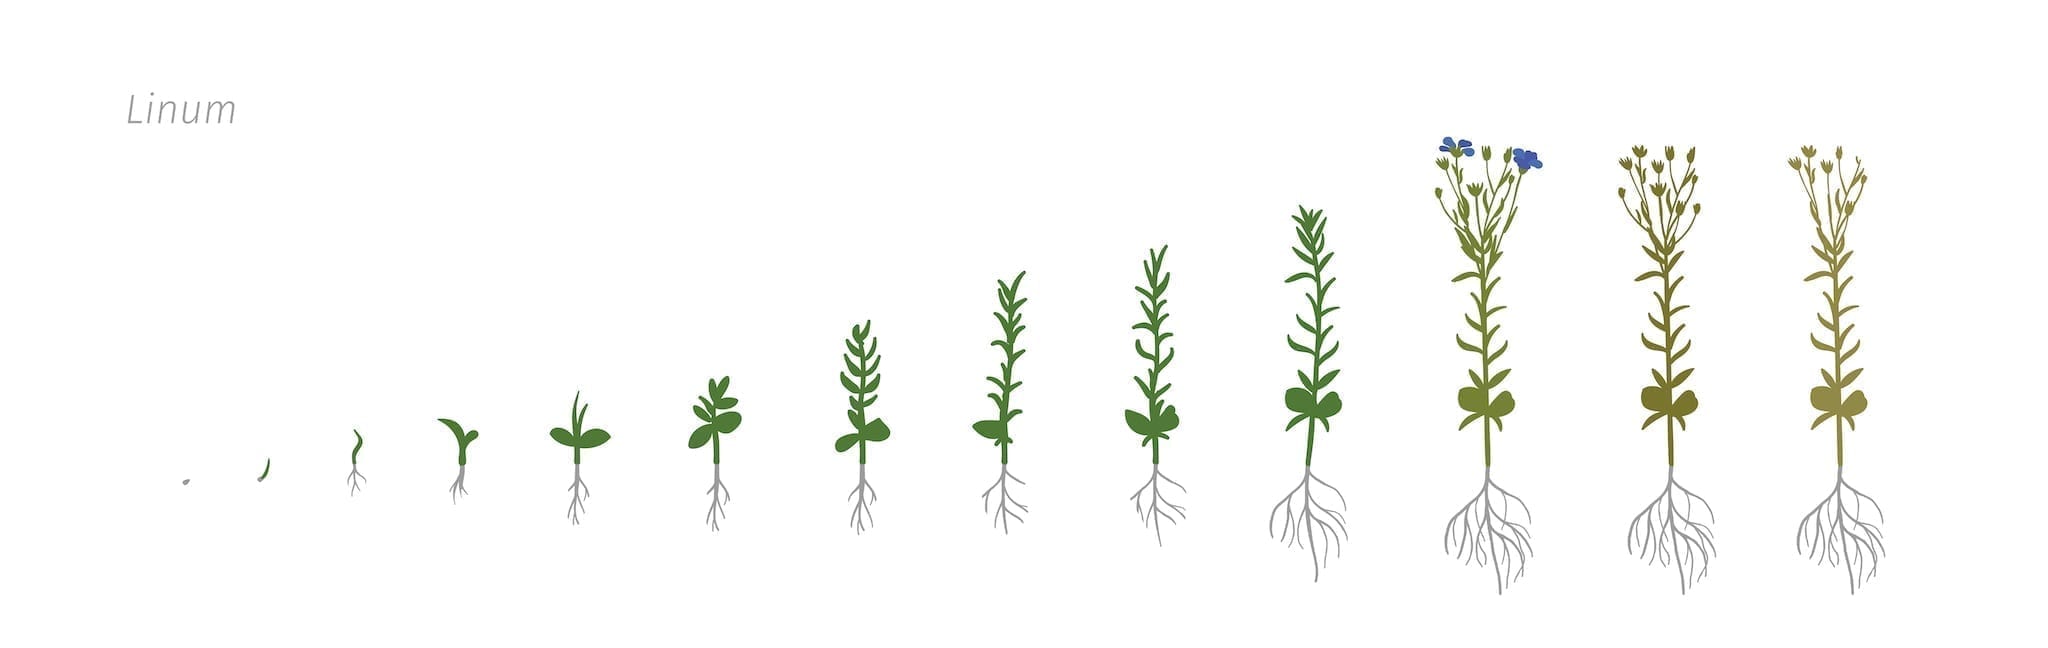 Stages of flax plant growing. Flax plant from seed to harvest.